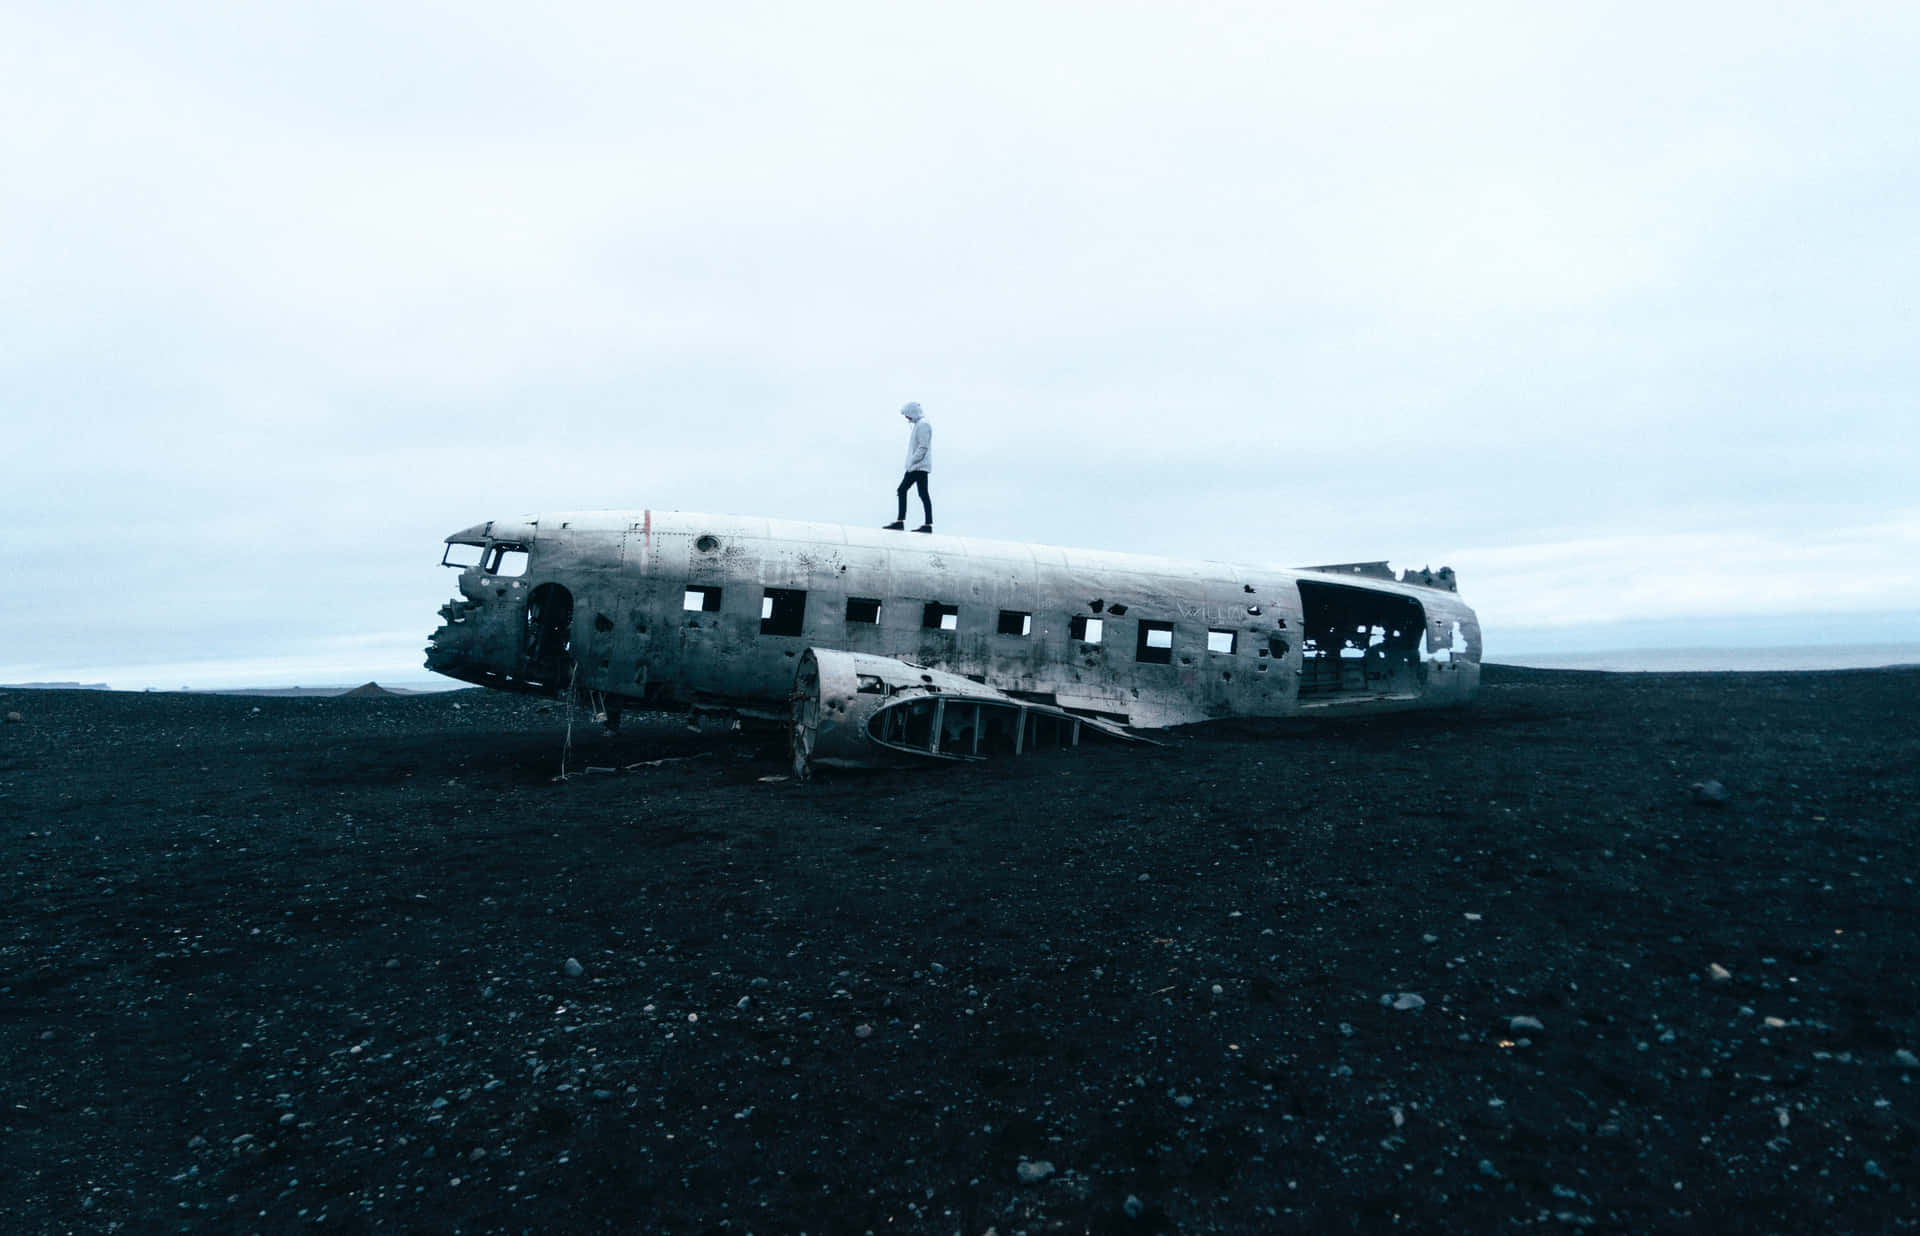 A Man Standing On Top Of An Old Airplane